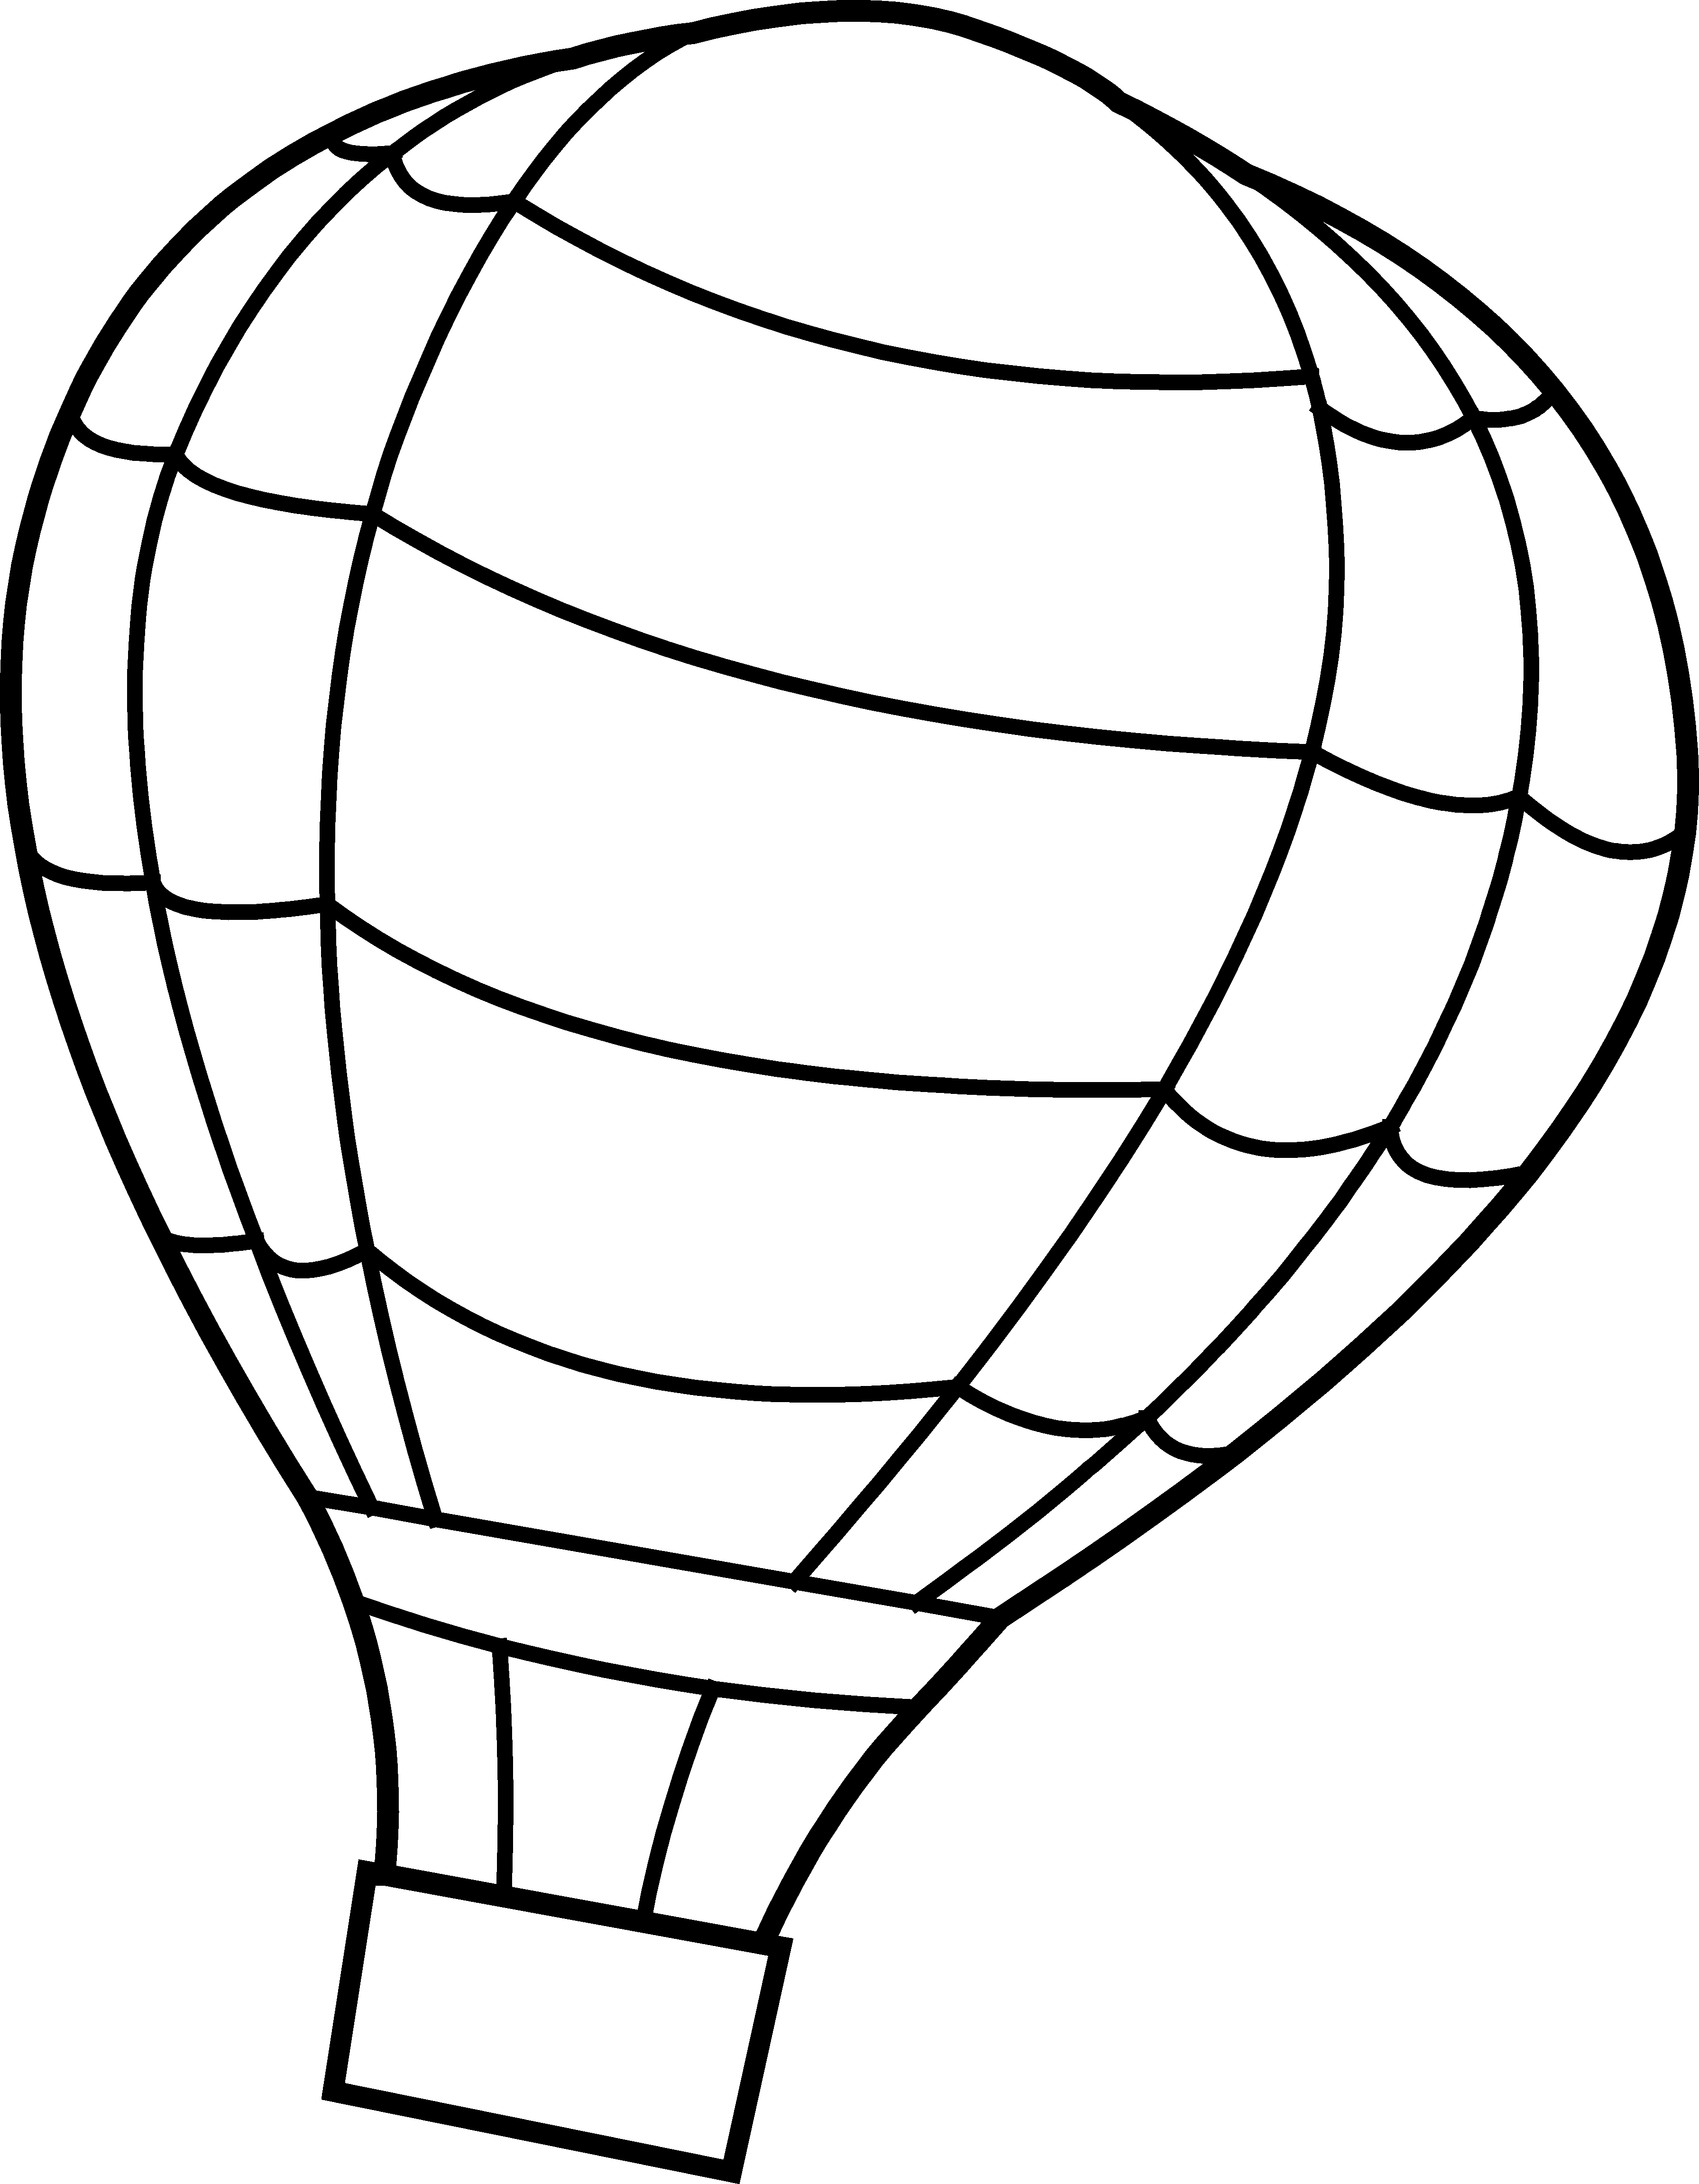 free-hot-air-balloon-outline-download-free-hot-air-balloon-outline-png